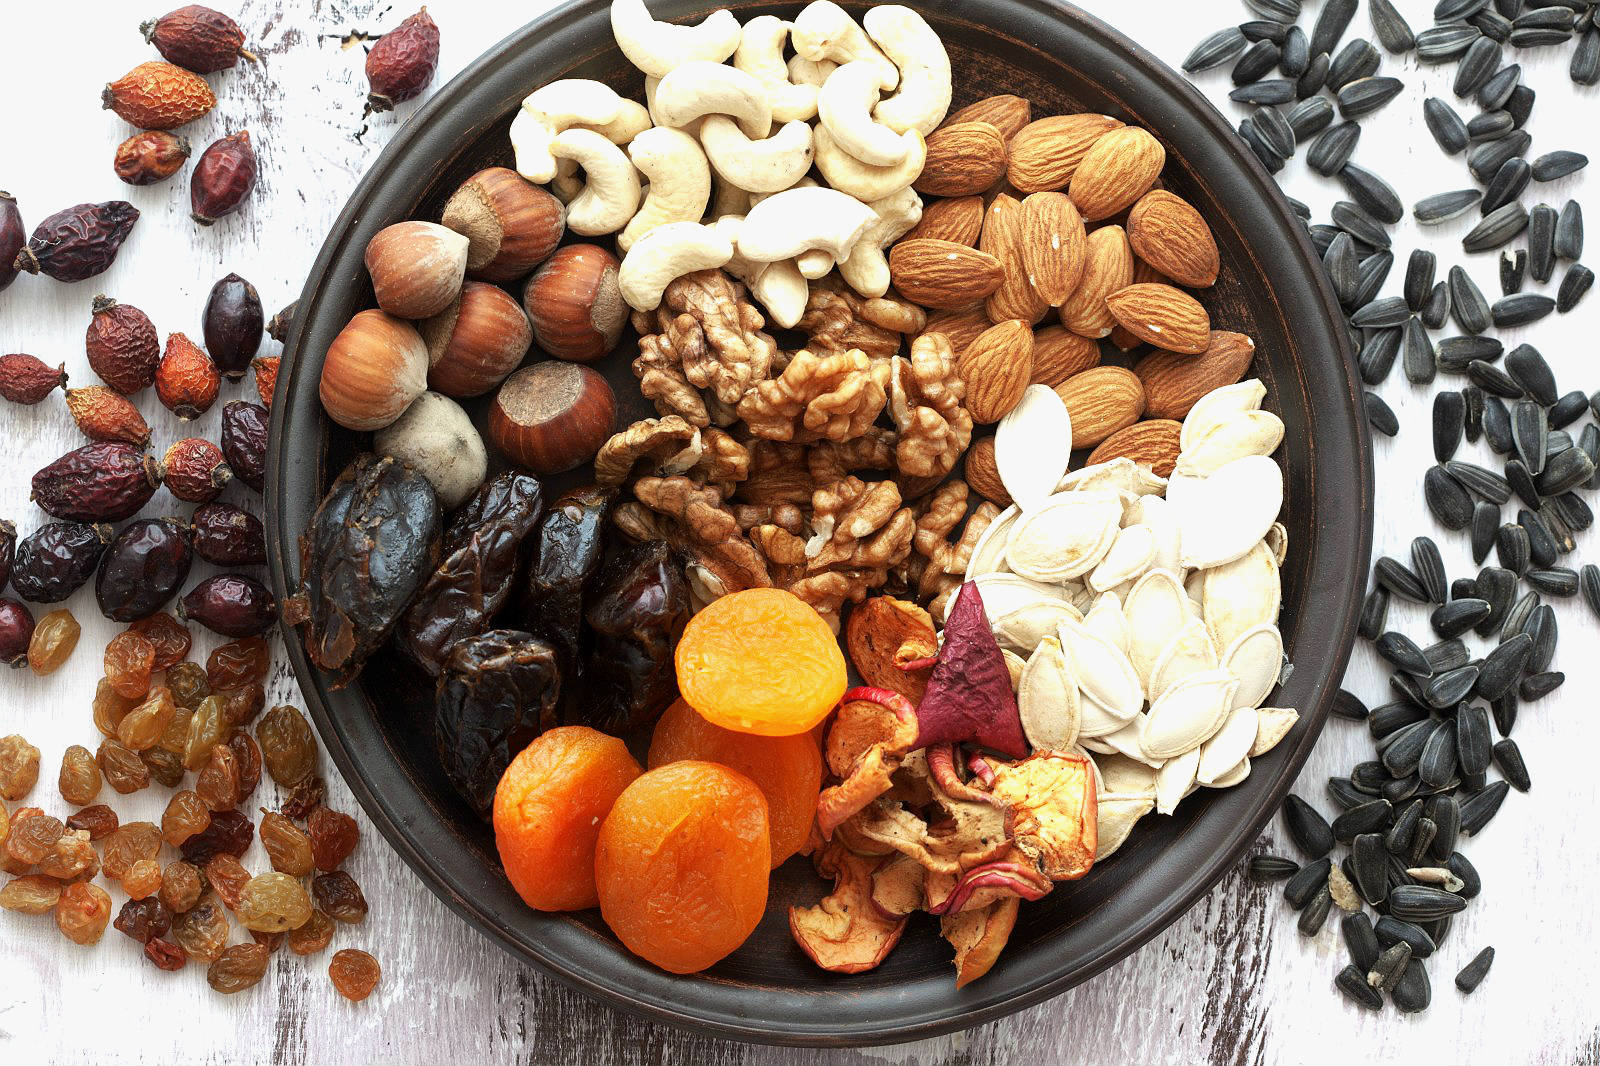 Dried Fruits and Nuts: Are they good for your health?